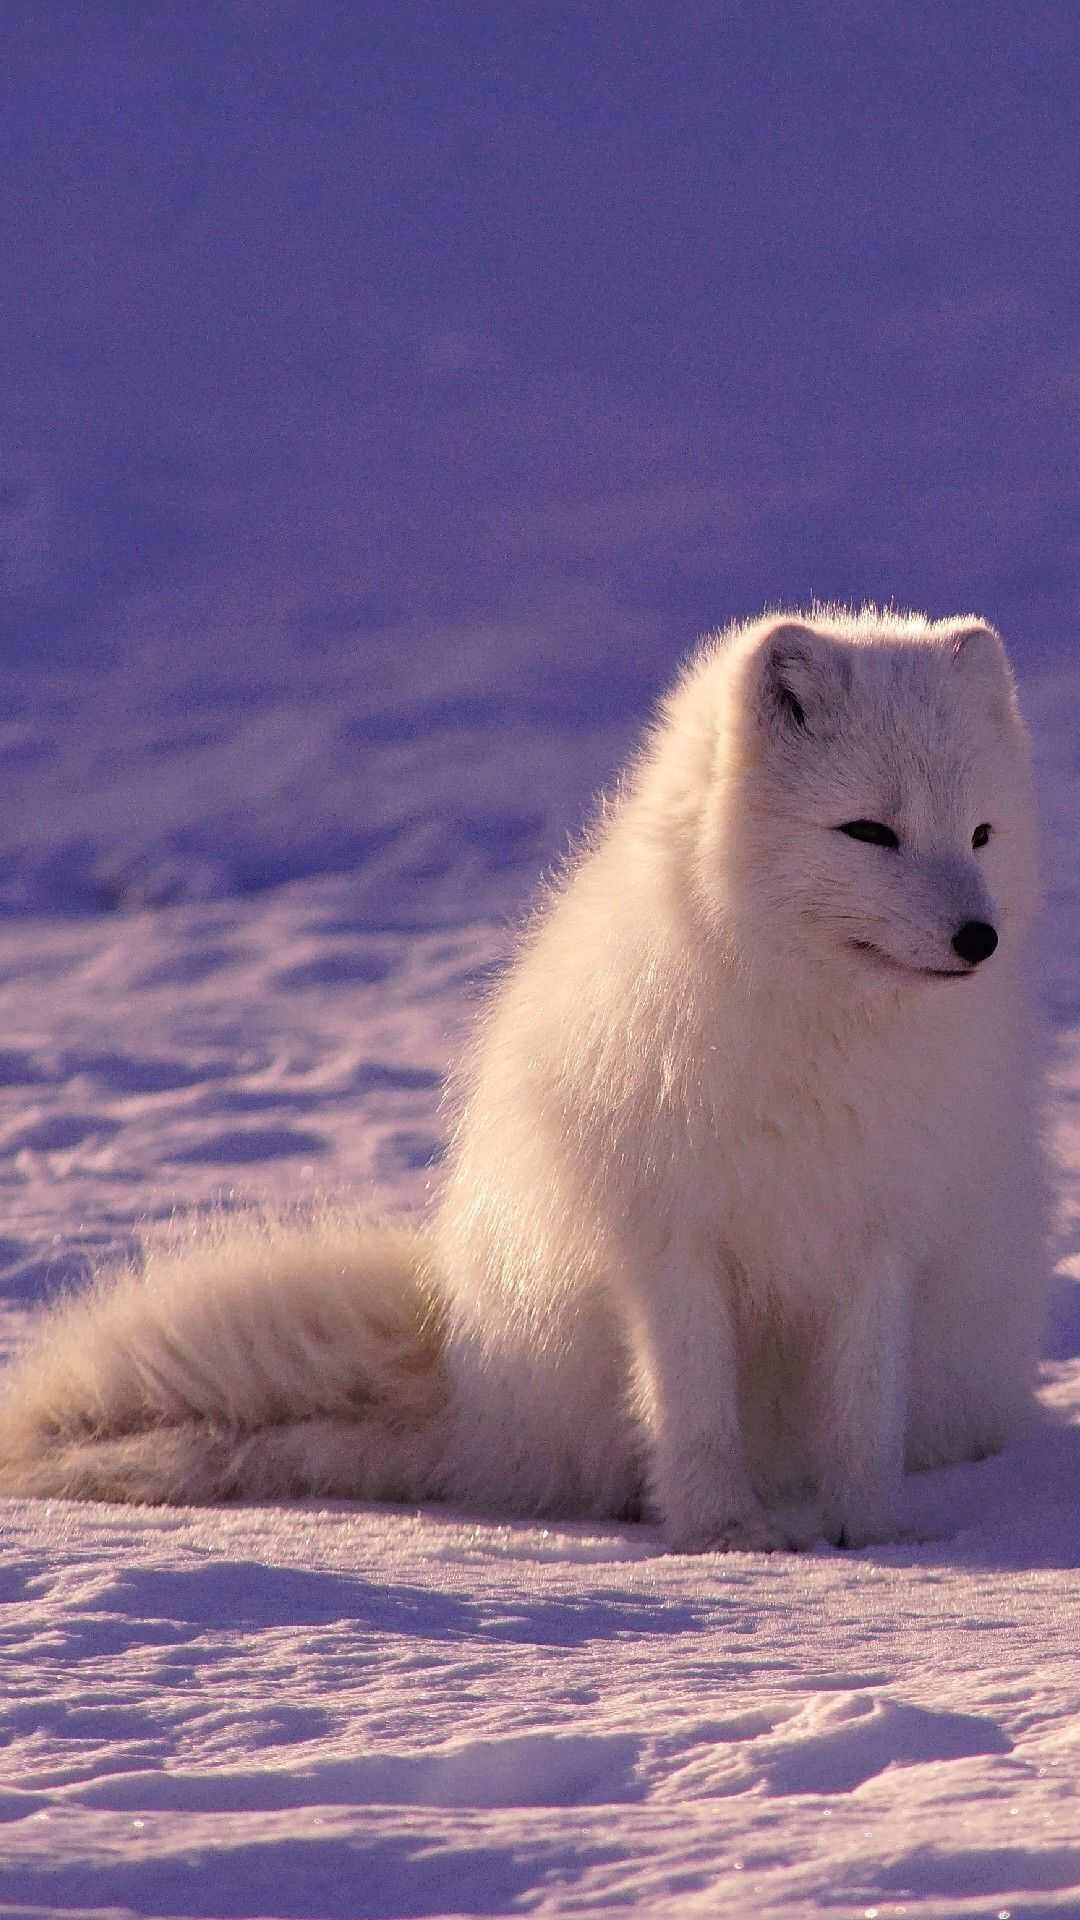 Fox: Vulpes lagopus, Well adapted to living in icy-cold environments. 1080x1920 Full HD Background.